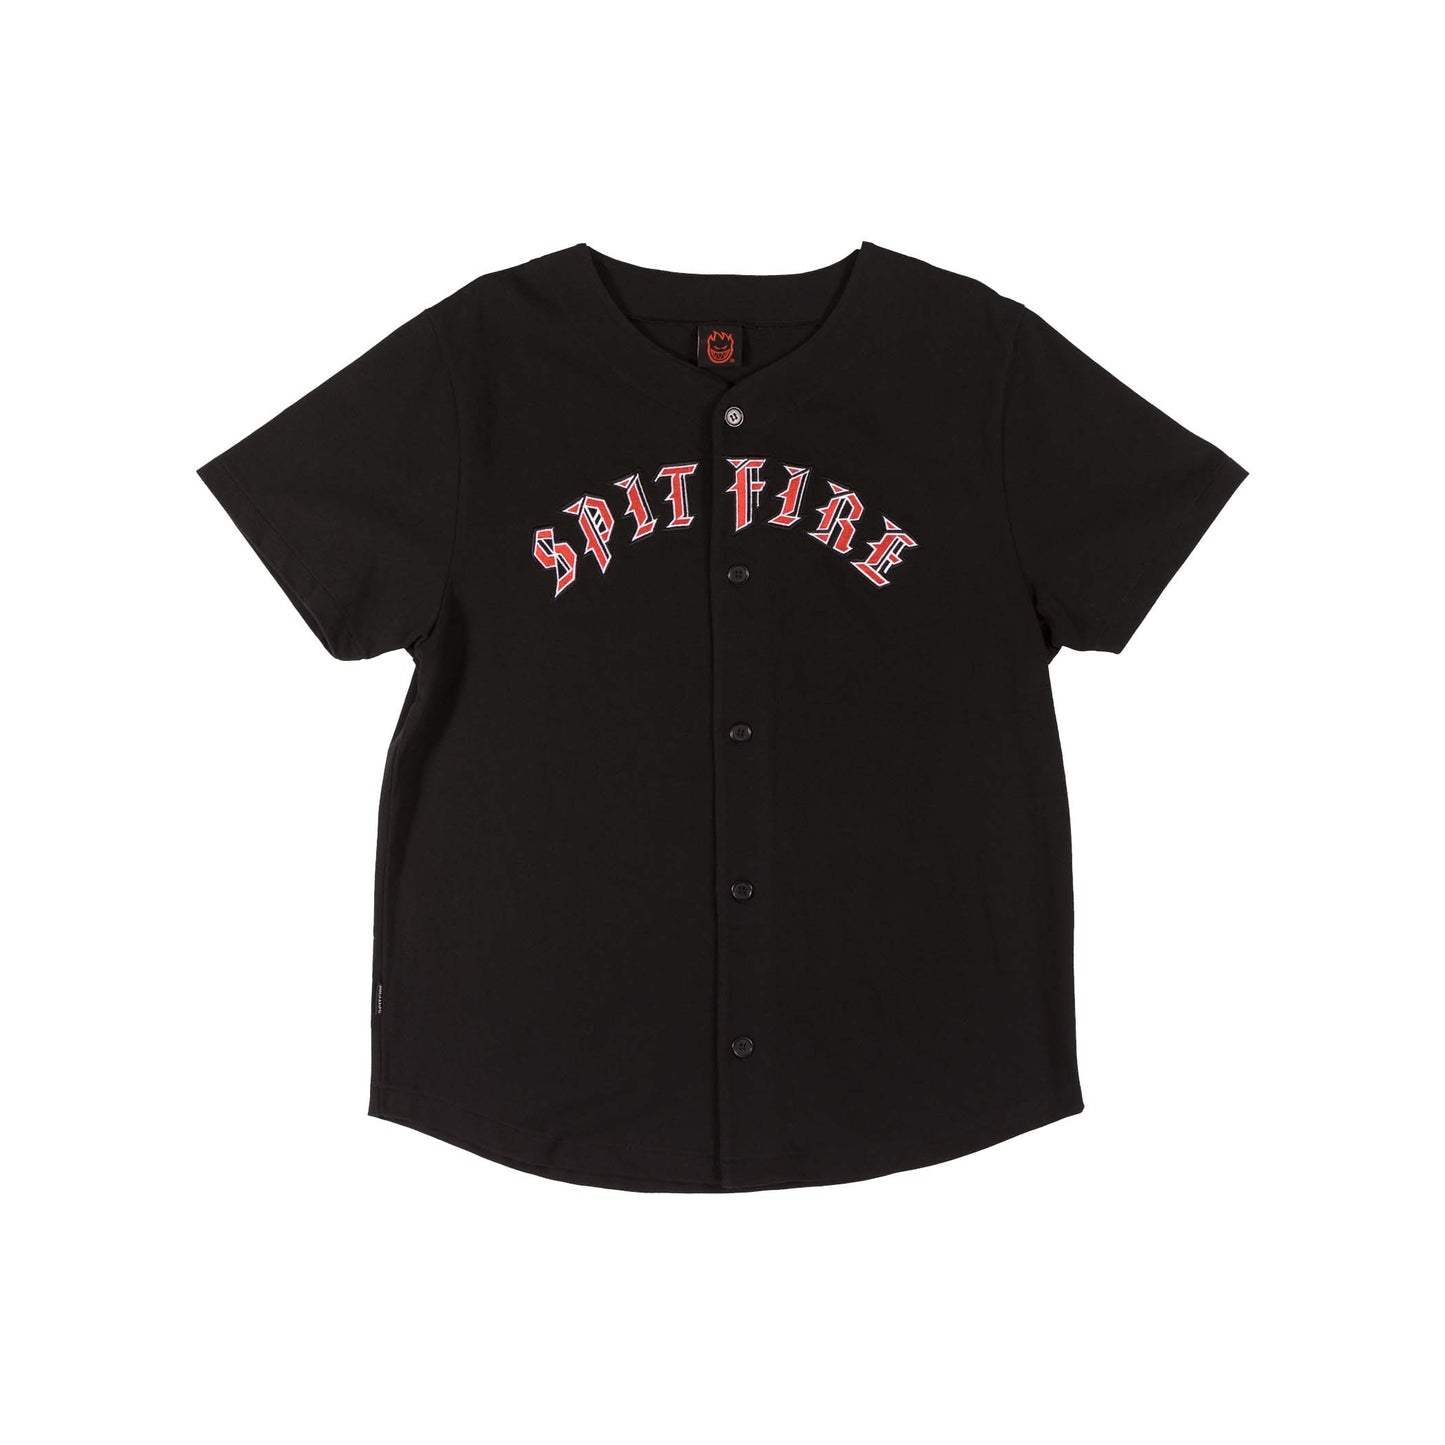 SPITFIRE - OLDE ARCH JERSEY TEE - BLACK